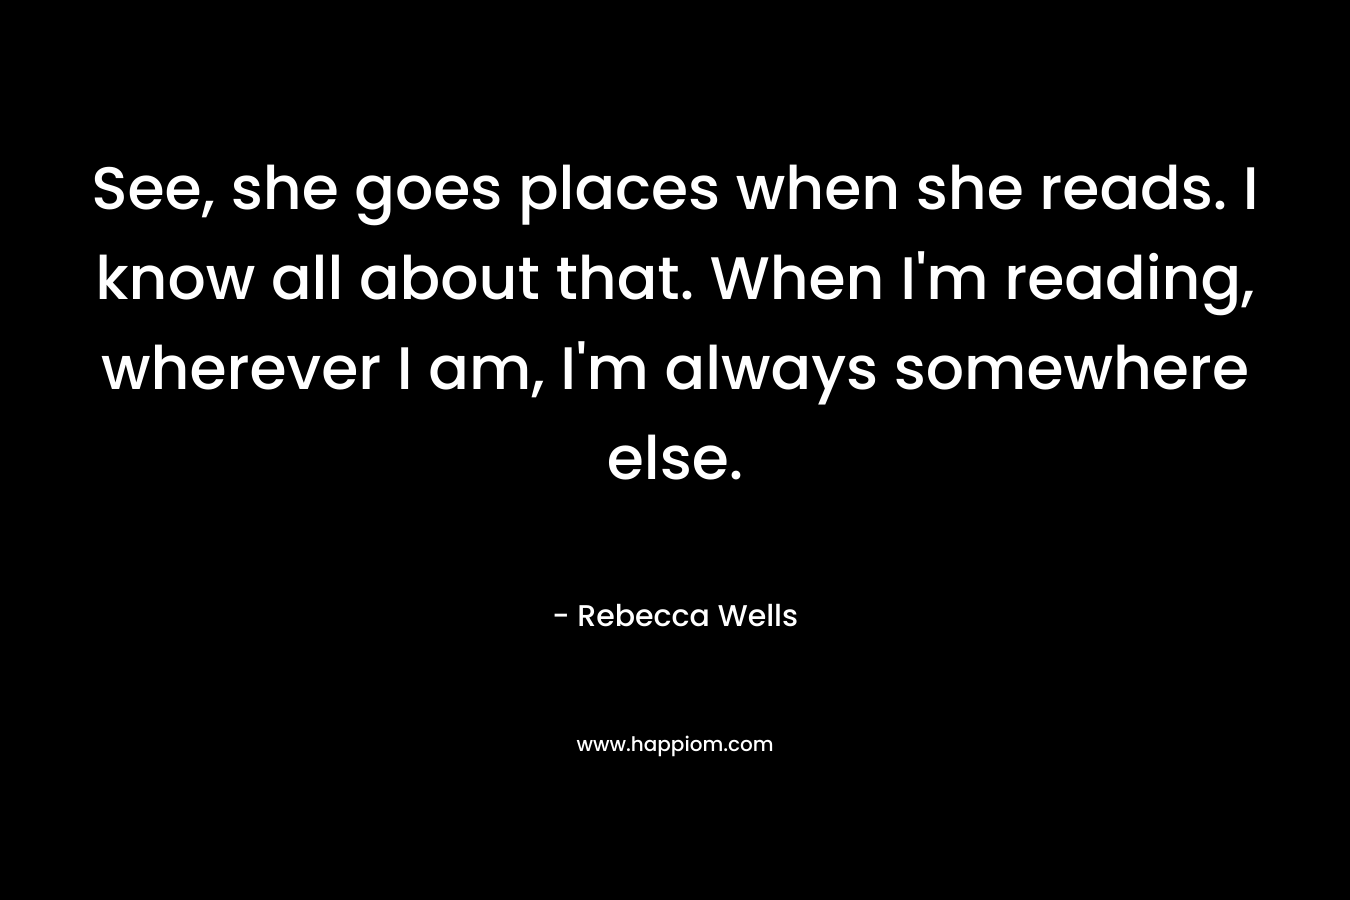 See, she goes places when she reads. I know all about that. When I'm reading, wherever I am, I'm always somewhere else.